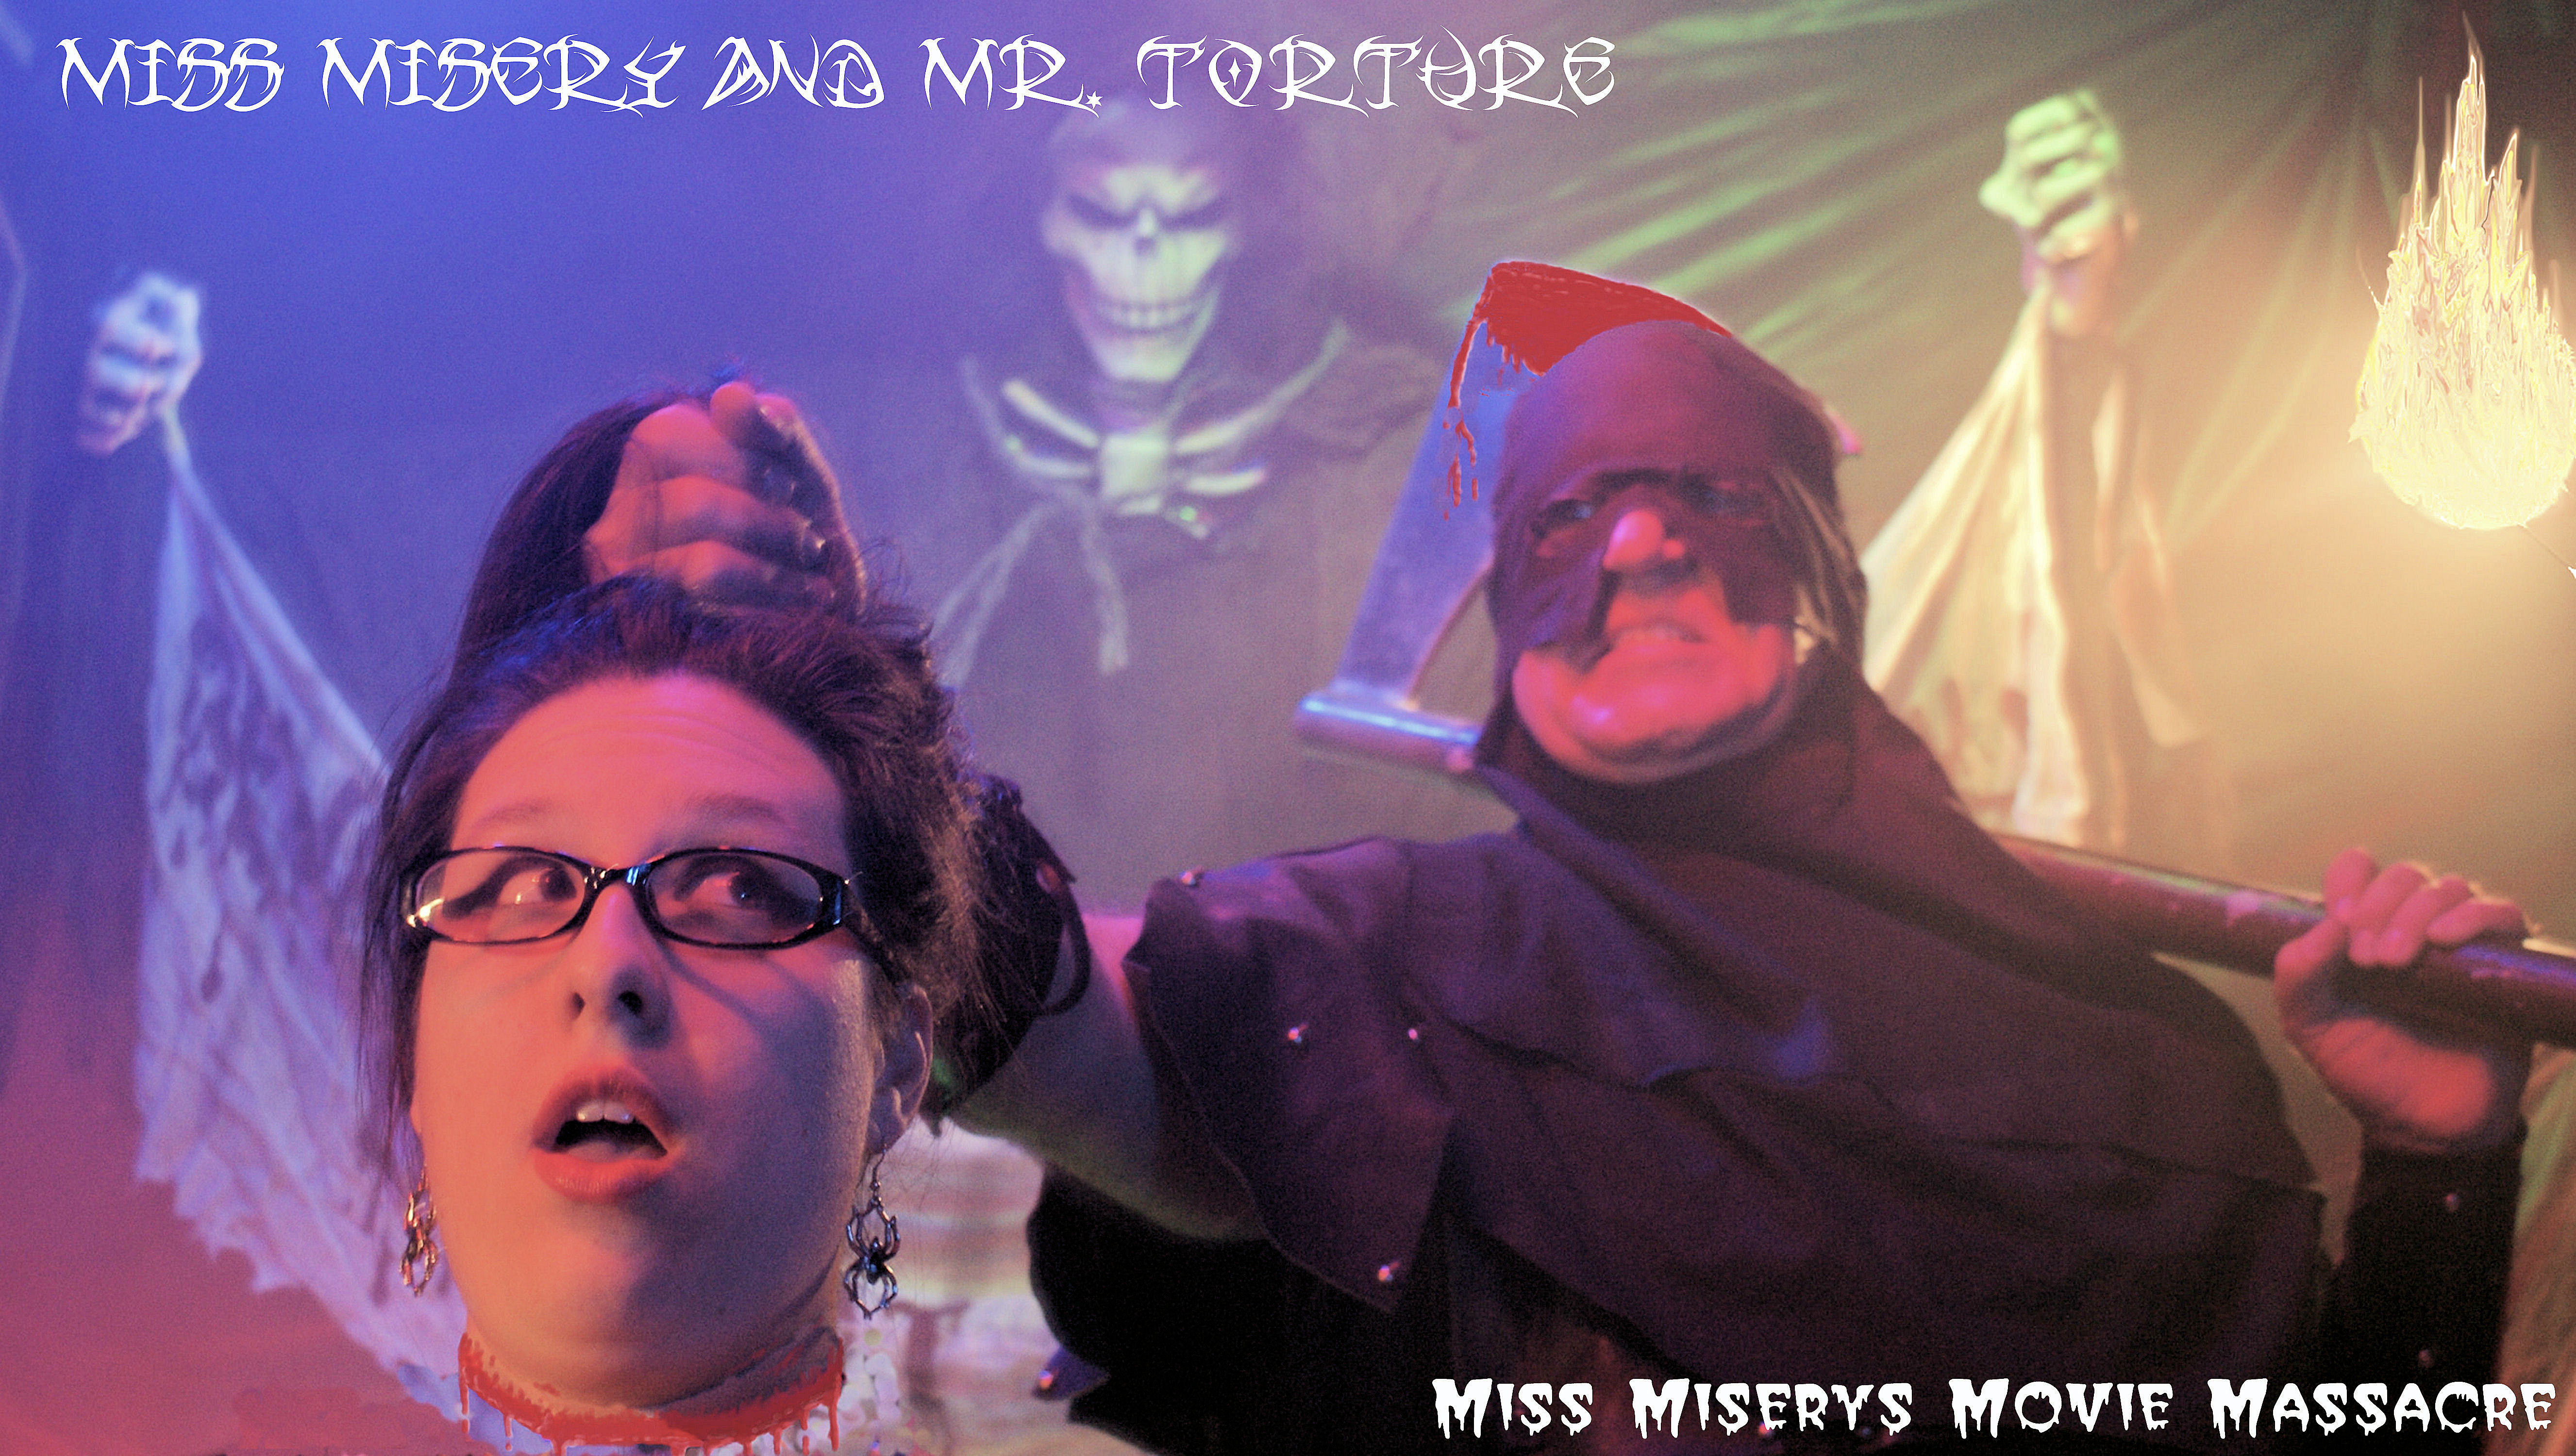 Mr. Torture and Miss Misery on the Tv set of 